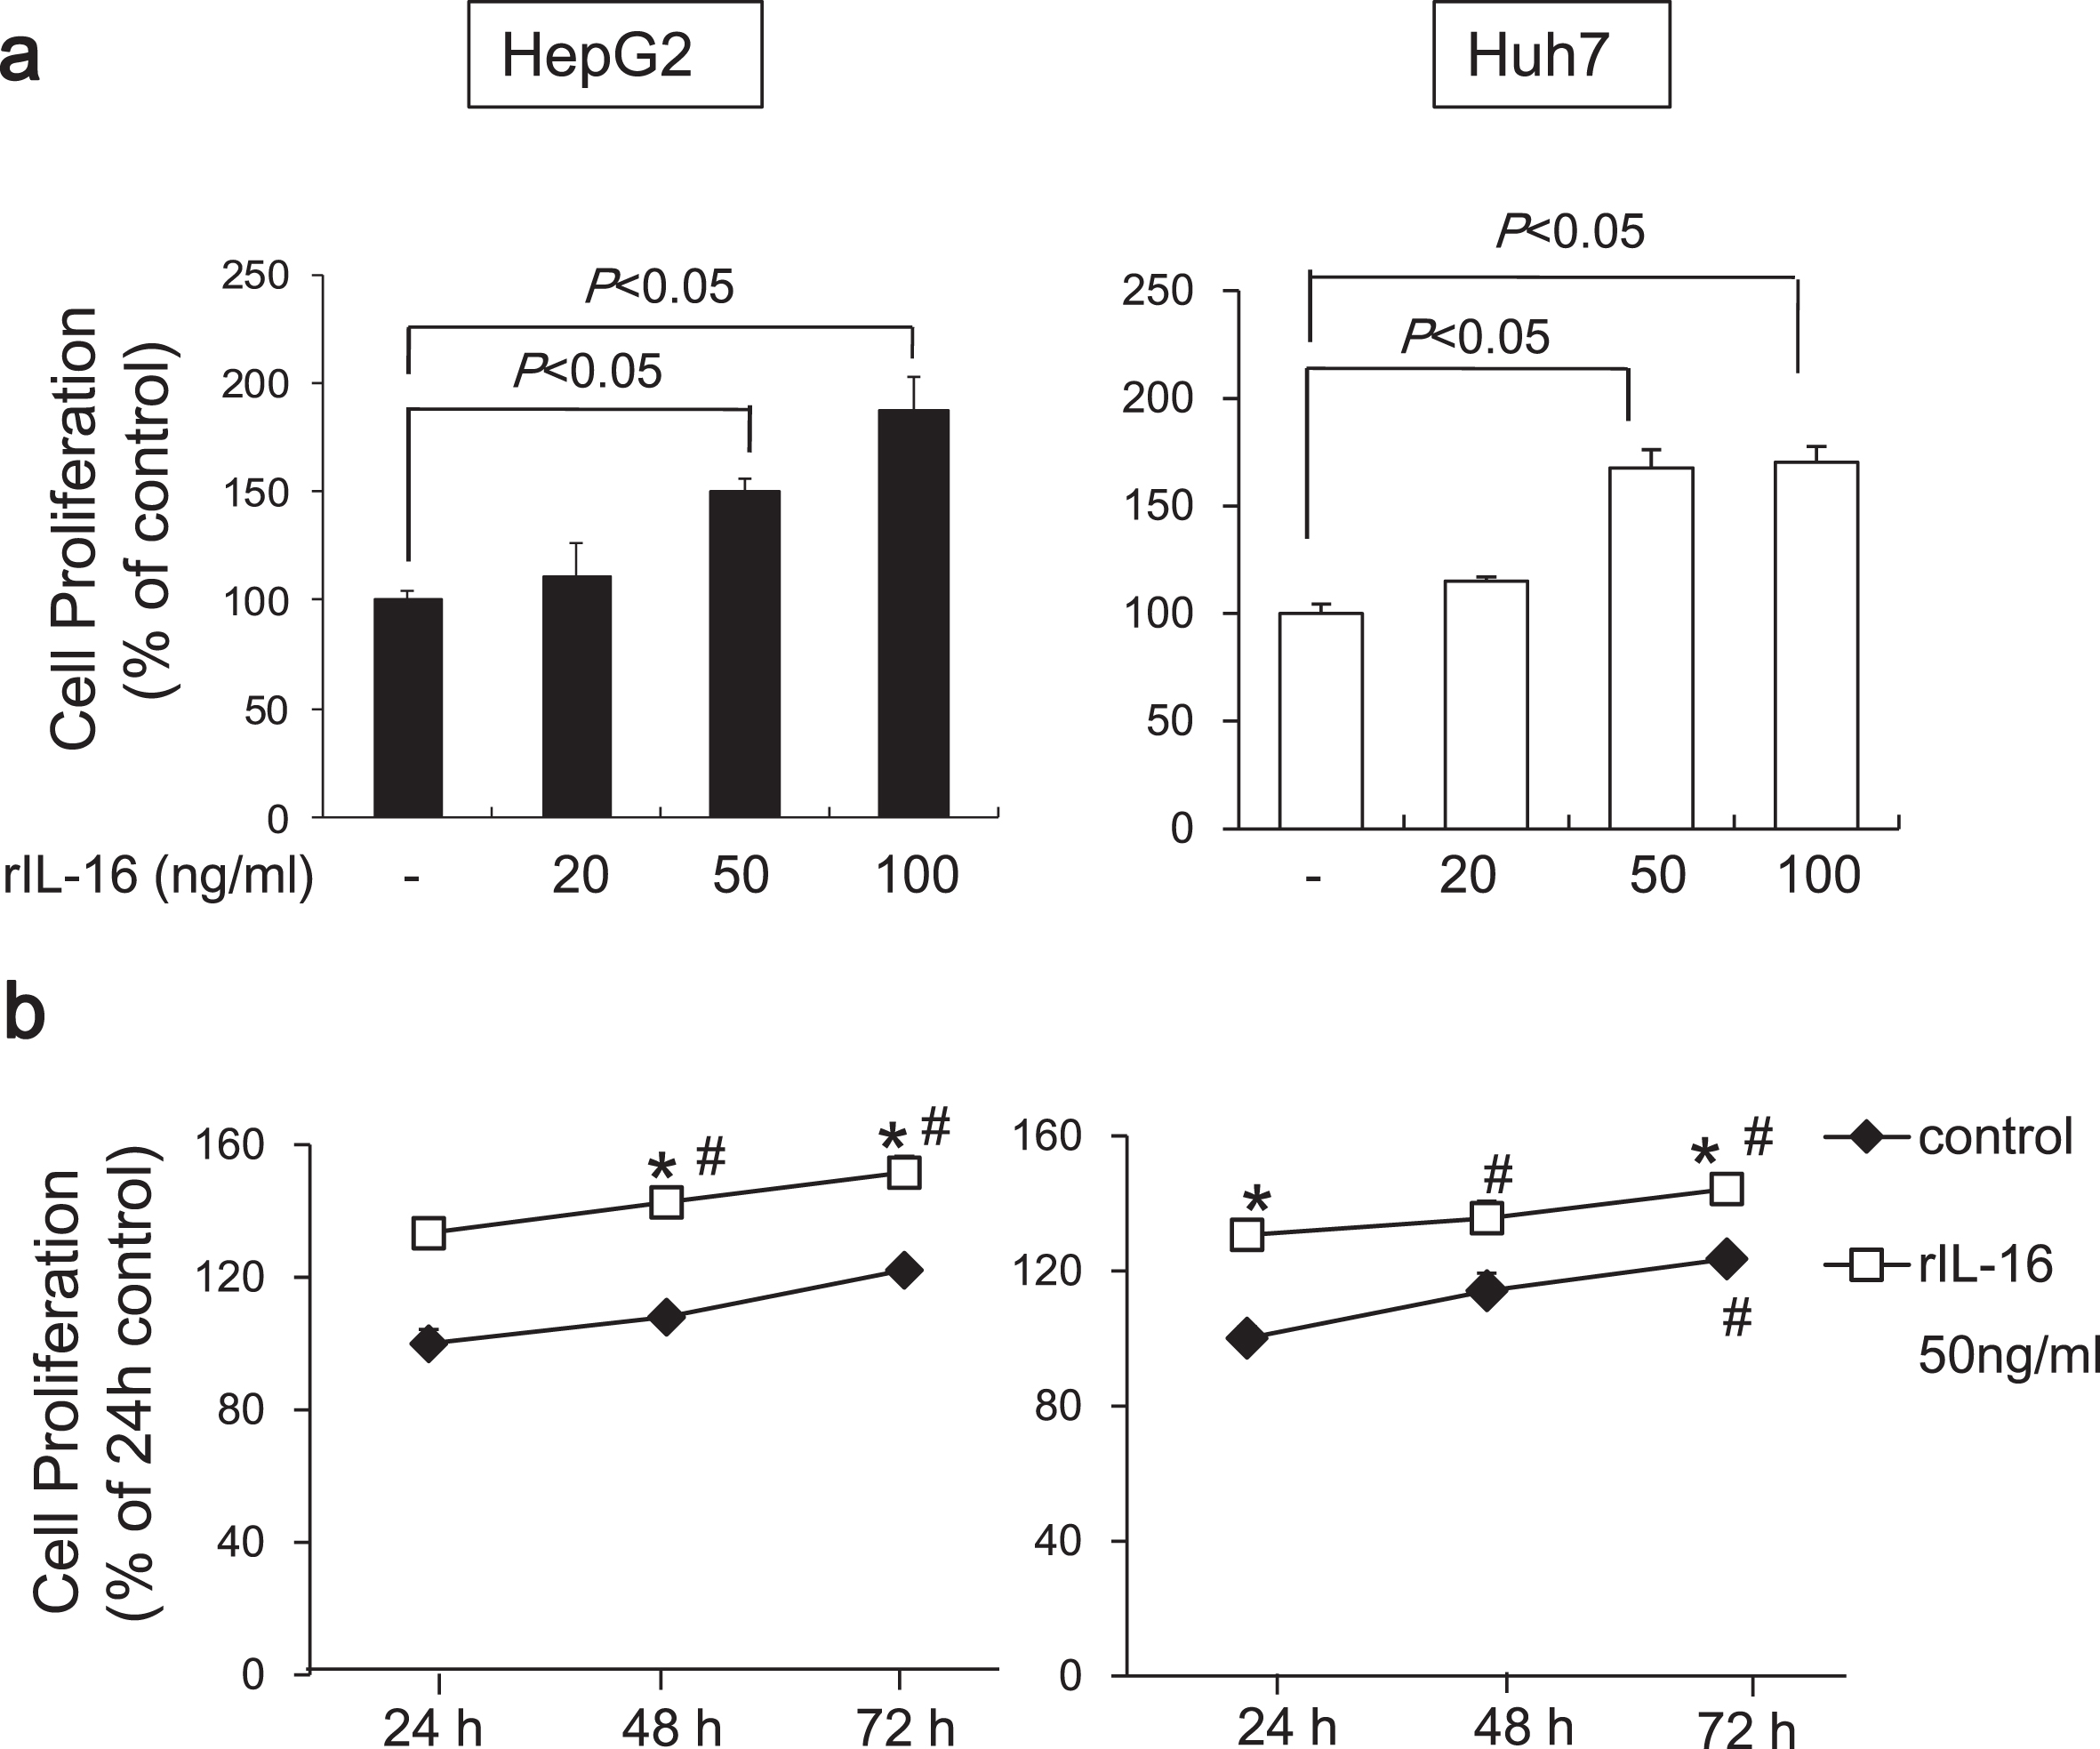 Proliferation of HepG2 and Huh7 cells cultured with rIL-16. (a) Cells (5×104) were treated with IL-16 at 20, 50, and 100 ng/mL in 96-well plates for 48 h. Cell proliferation was measured using the MTS assay and measuring absorbance at 490 nm. Cell proliferation is presented as the ratio of the optical density of IL-16-treated cells to that of untreated cells. Data indicate the mean±SEM and are representative of eight and six independent experiments with HepG2 and Huh7 cells, respectively. p < 0.05 versus untreated cells. (b) Cell proliferation of HCC cells treated with 50 ng/mL rIL-16 was evaluated for 72 h. Data indicate the mean±SEM and are representative of six independent experiments each with HepG2 and Huh7 cells. *p < 0.05 versus untreated cells. #p < 0.05 versus untreated cells for 24 h.